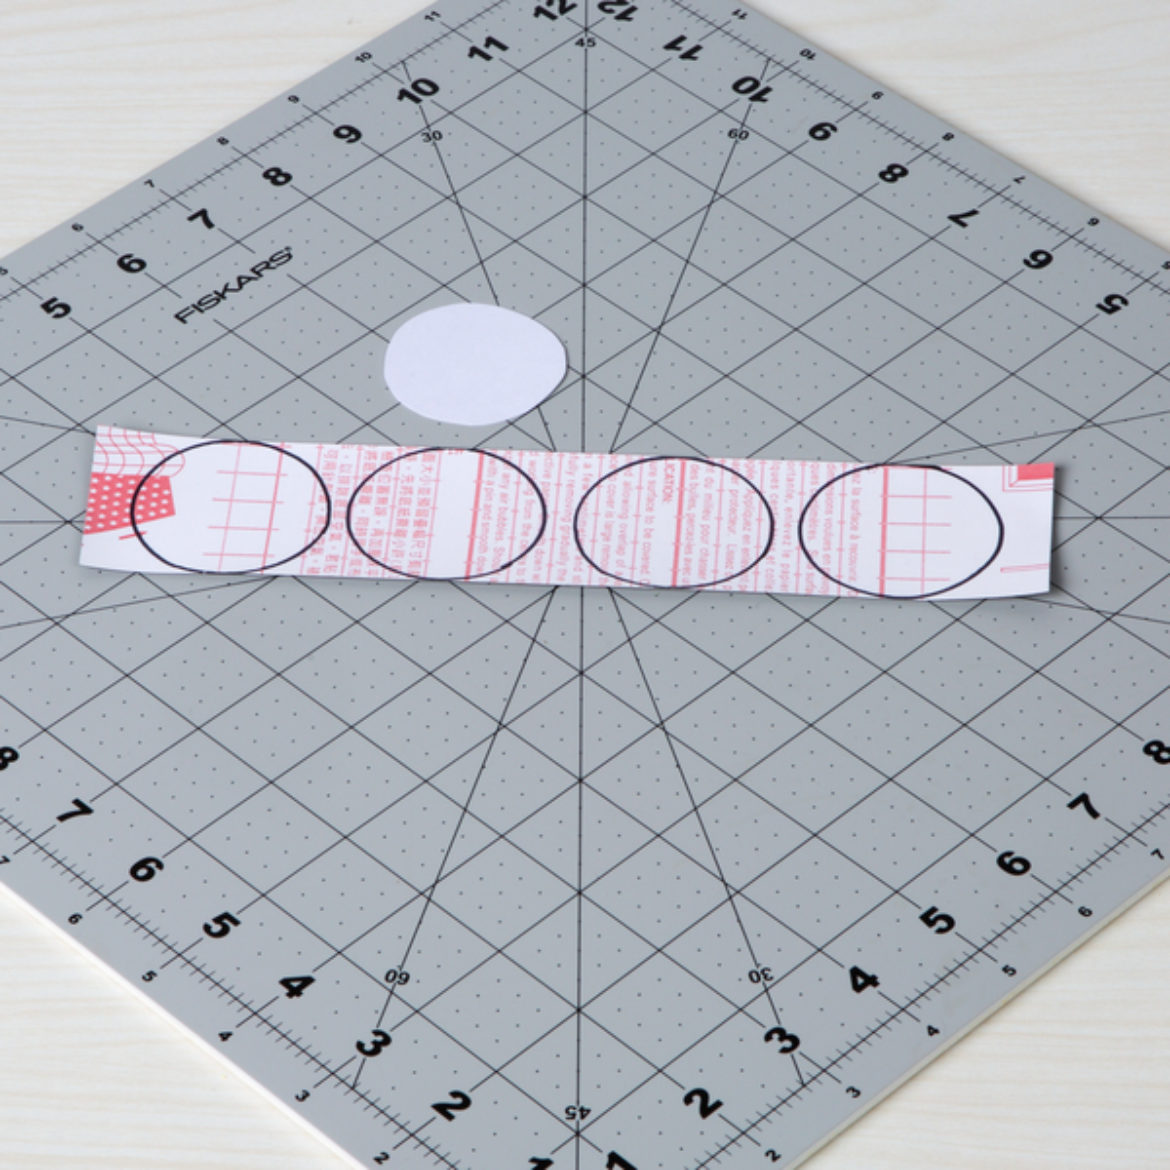 Circles traced on the back of chalkboard tape using the template made in the previous step